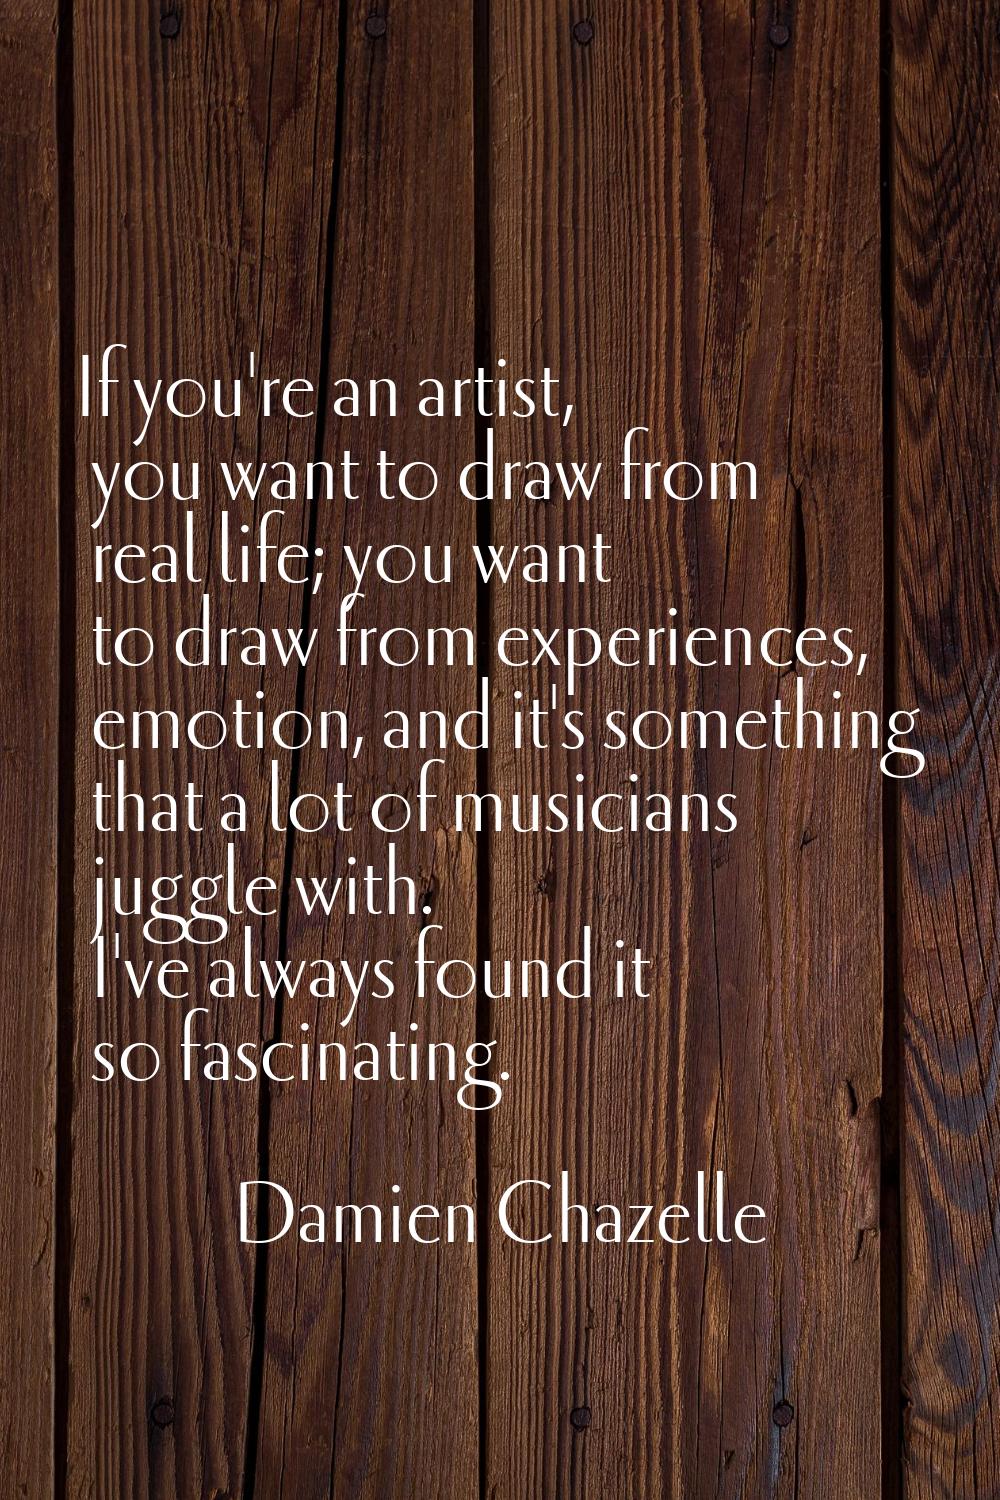 If you're an artist, you want to draw from real life; you want to draw from experiences, emotion, a